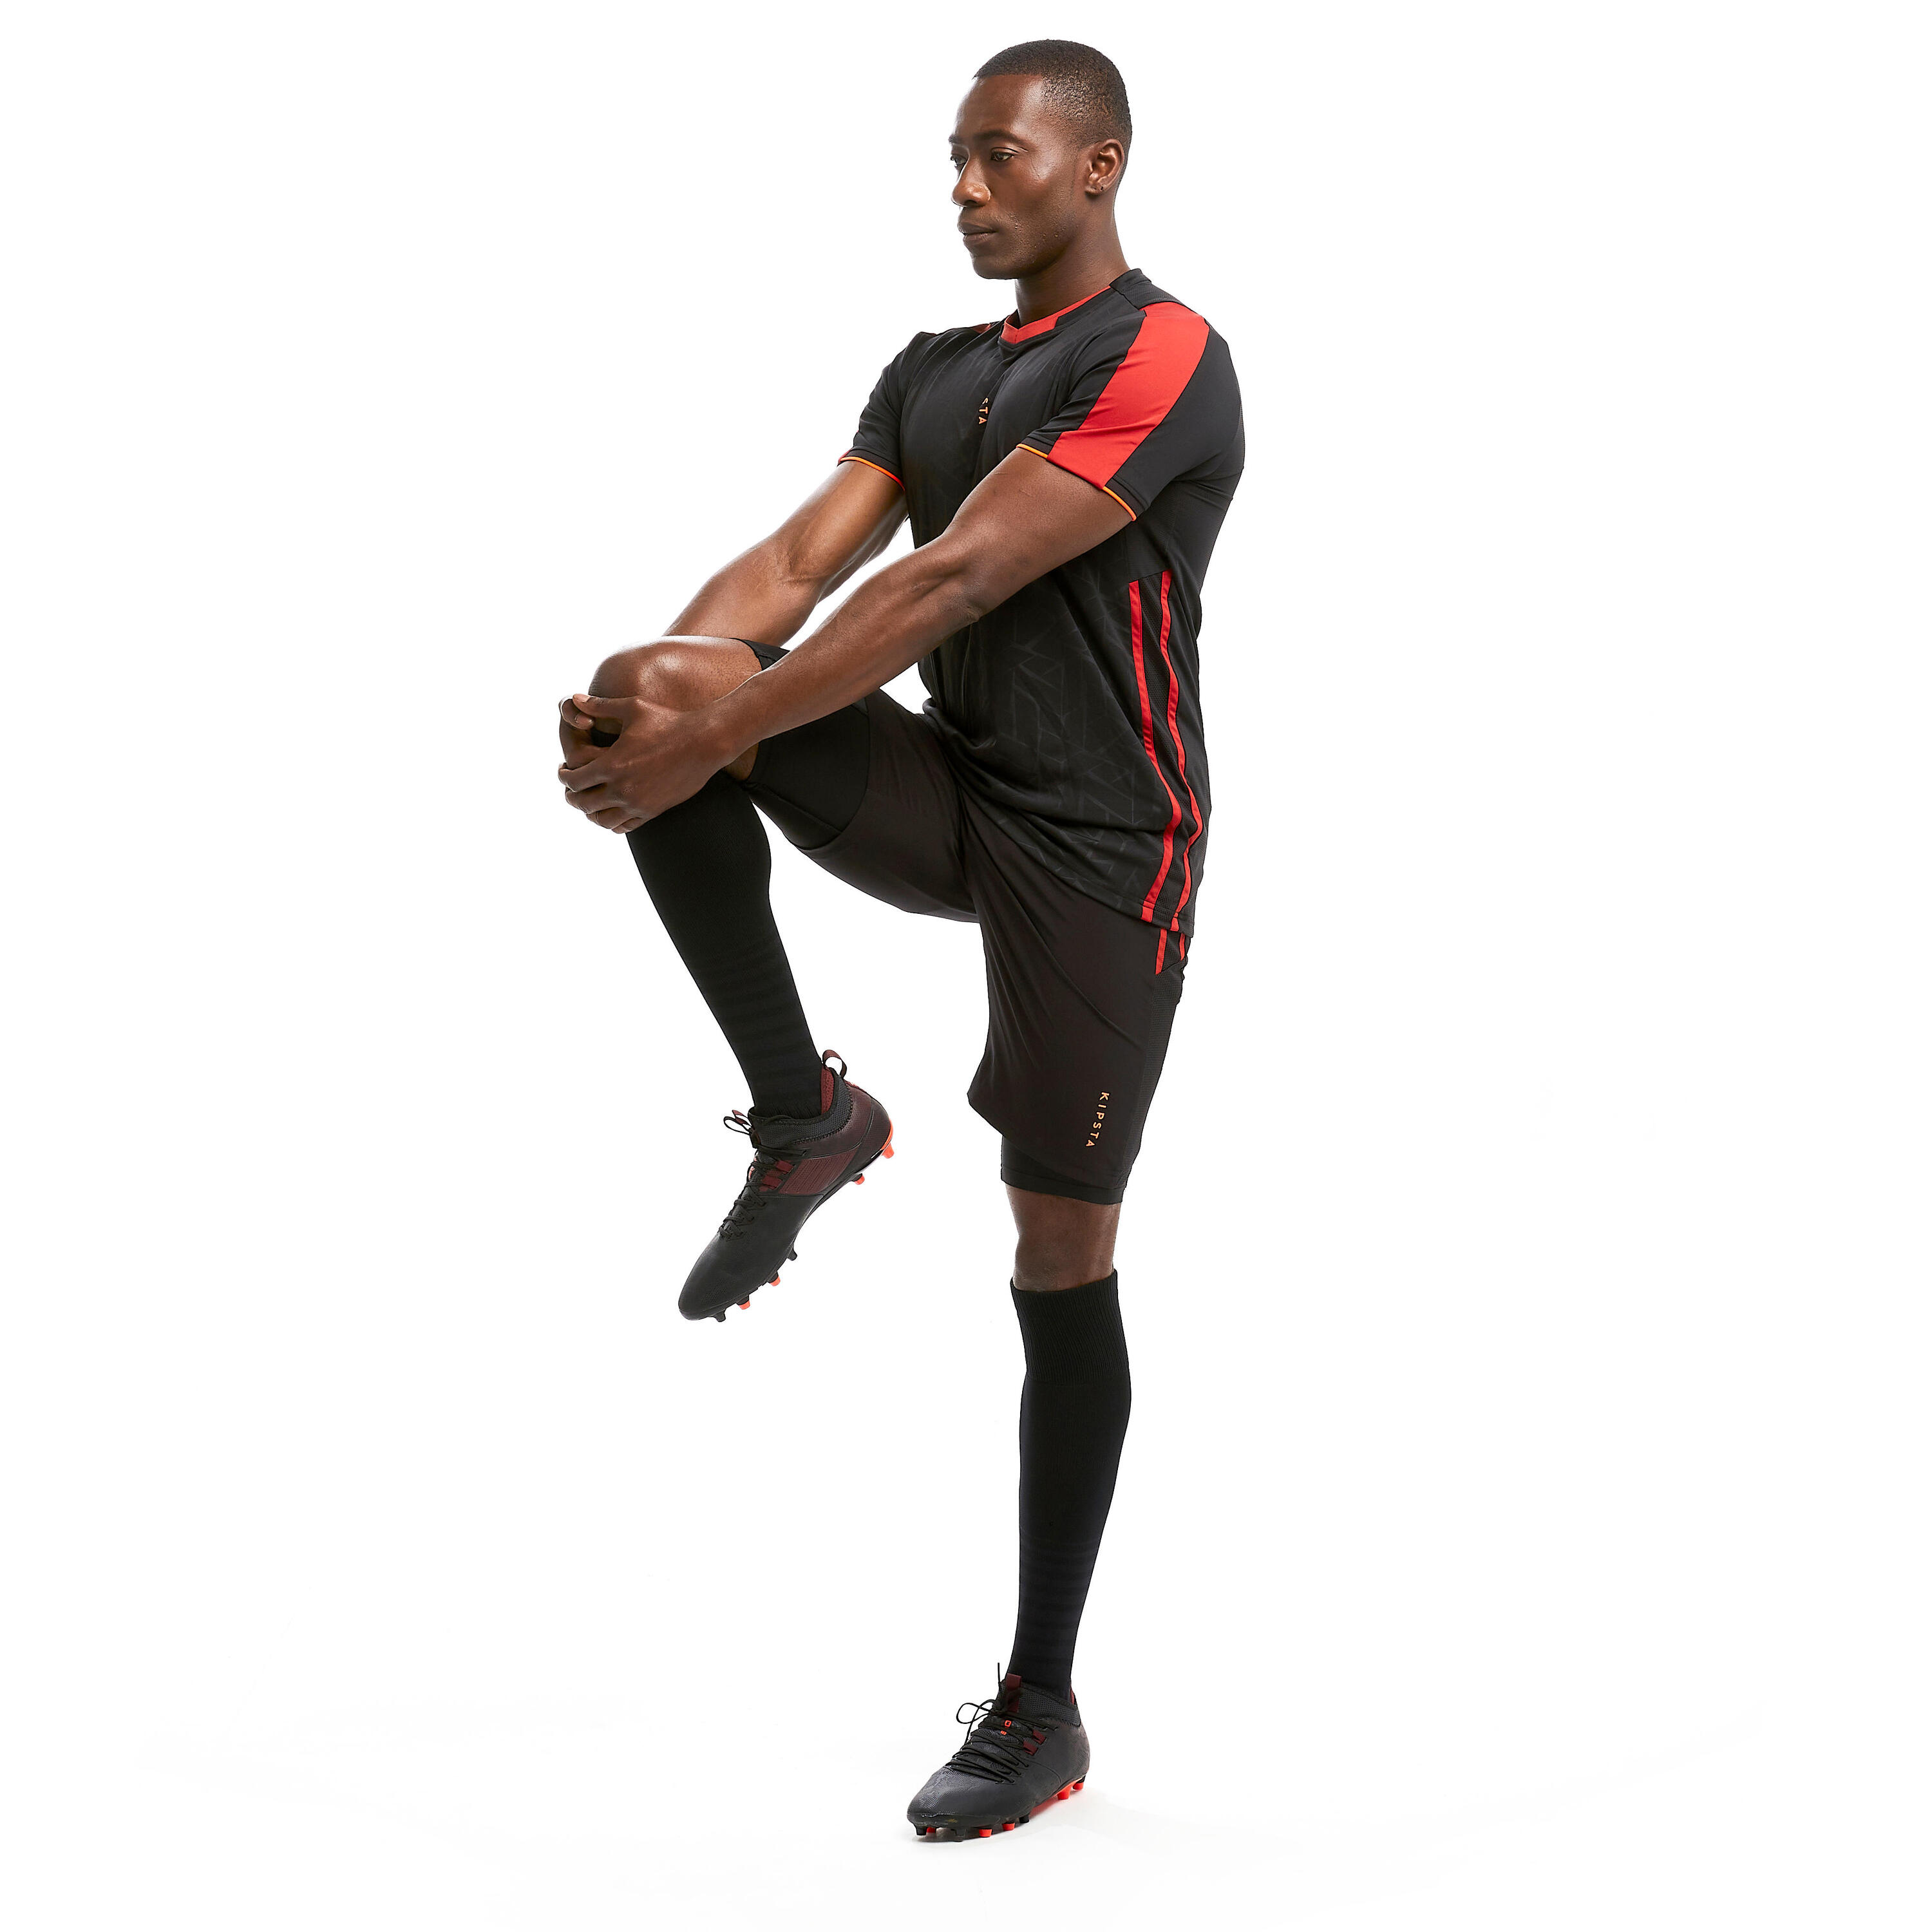 Adult 3-in-1 Football Shorts Traxium - Black/Red 8/9